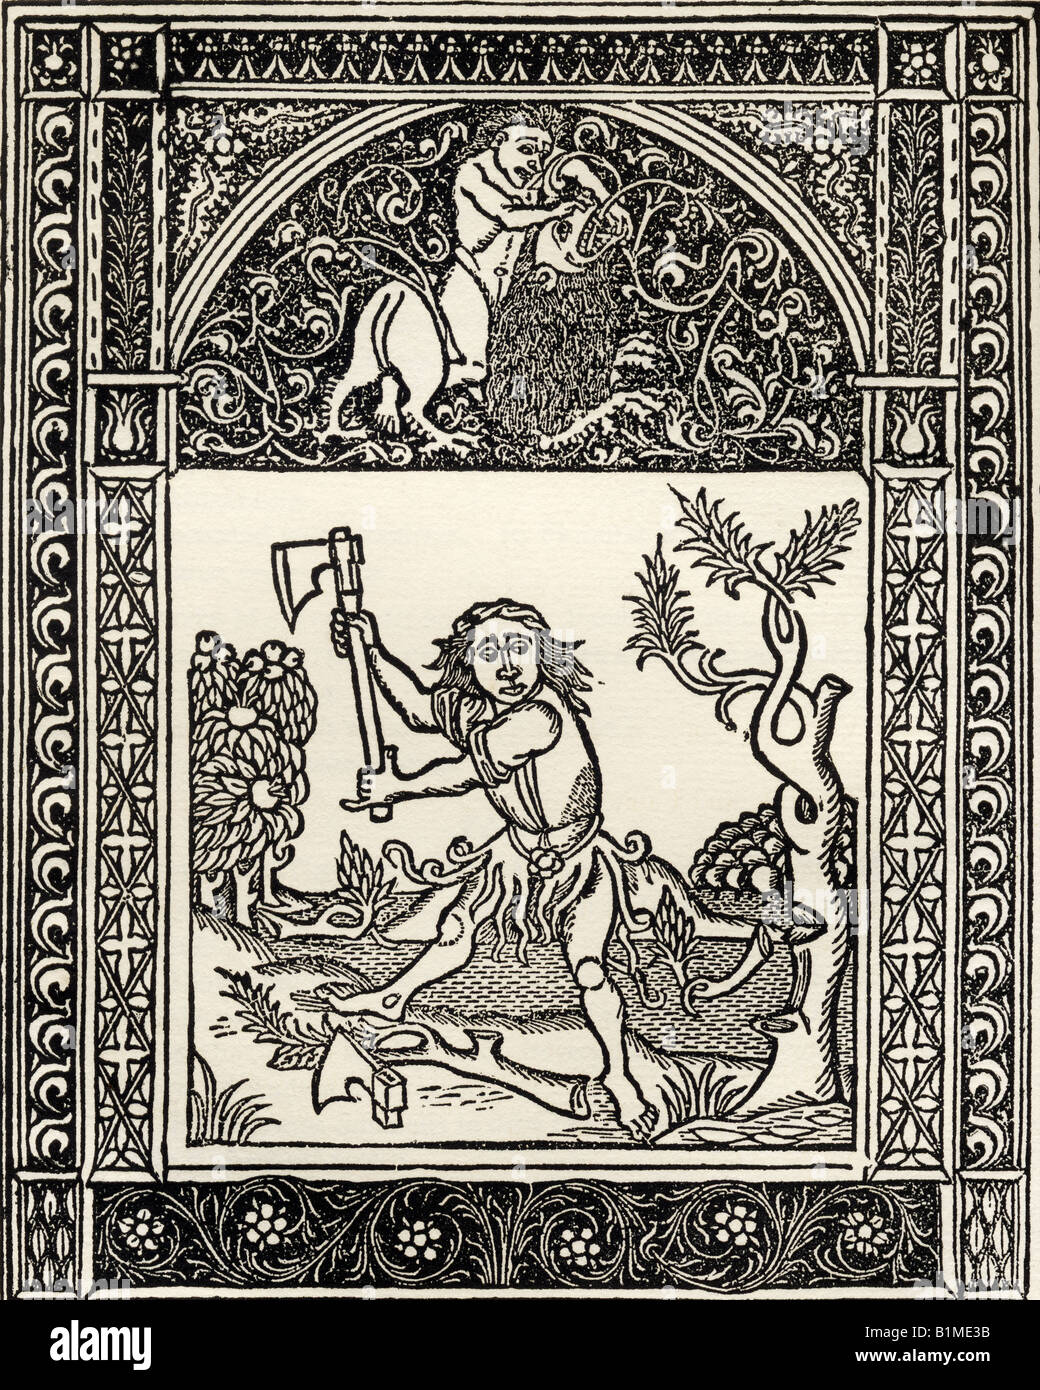 Facsimile of Illustration of the Fable of the Woodcutter and the Axe, from Esopi Vita et Fabulae, printed Naples 1485. Stock Photo